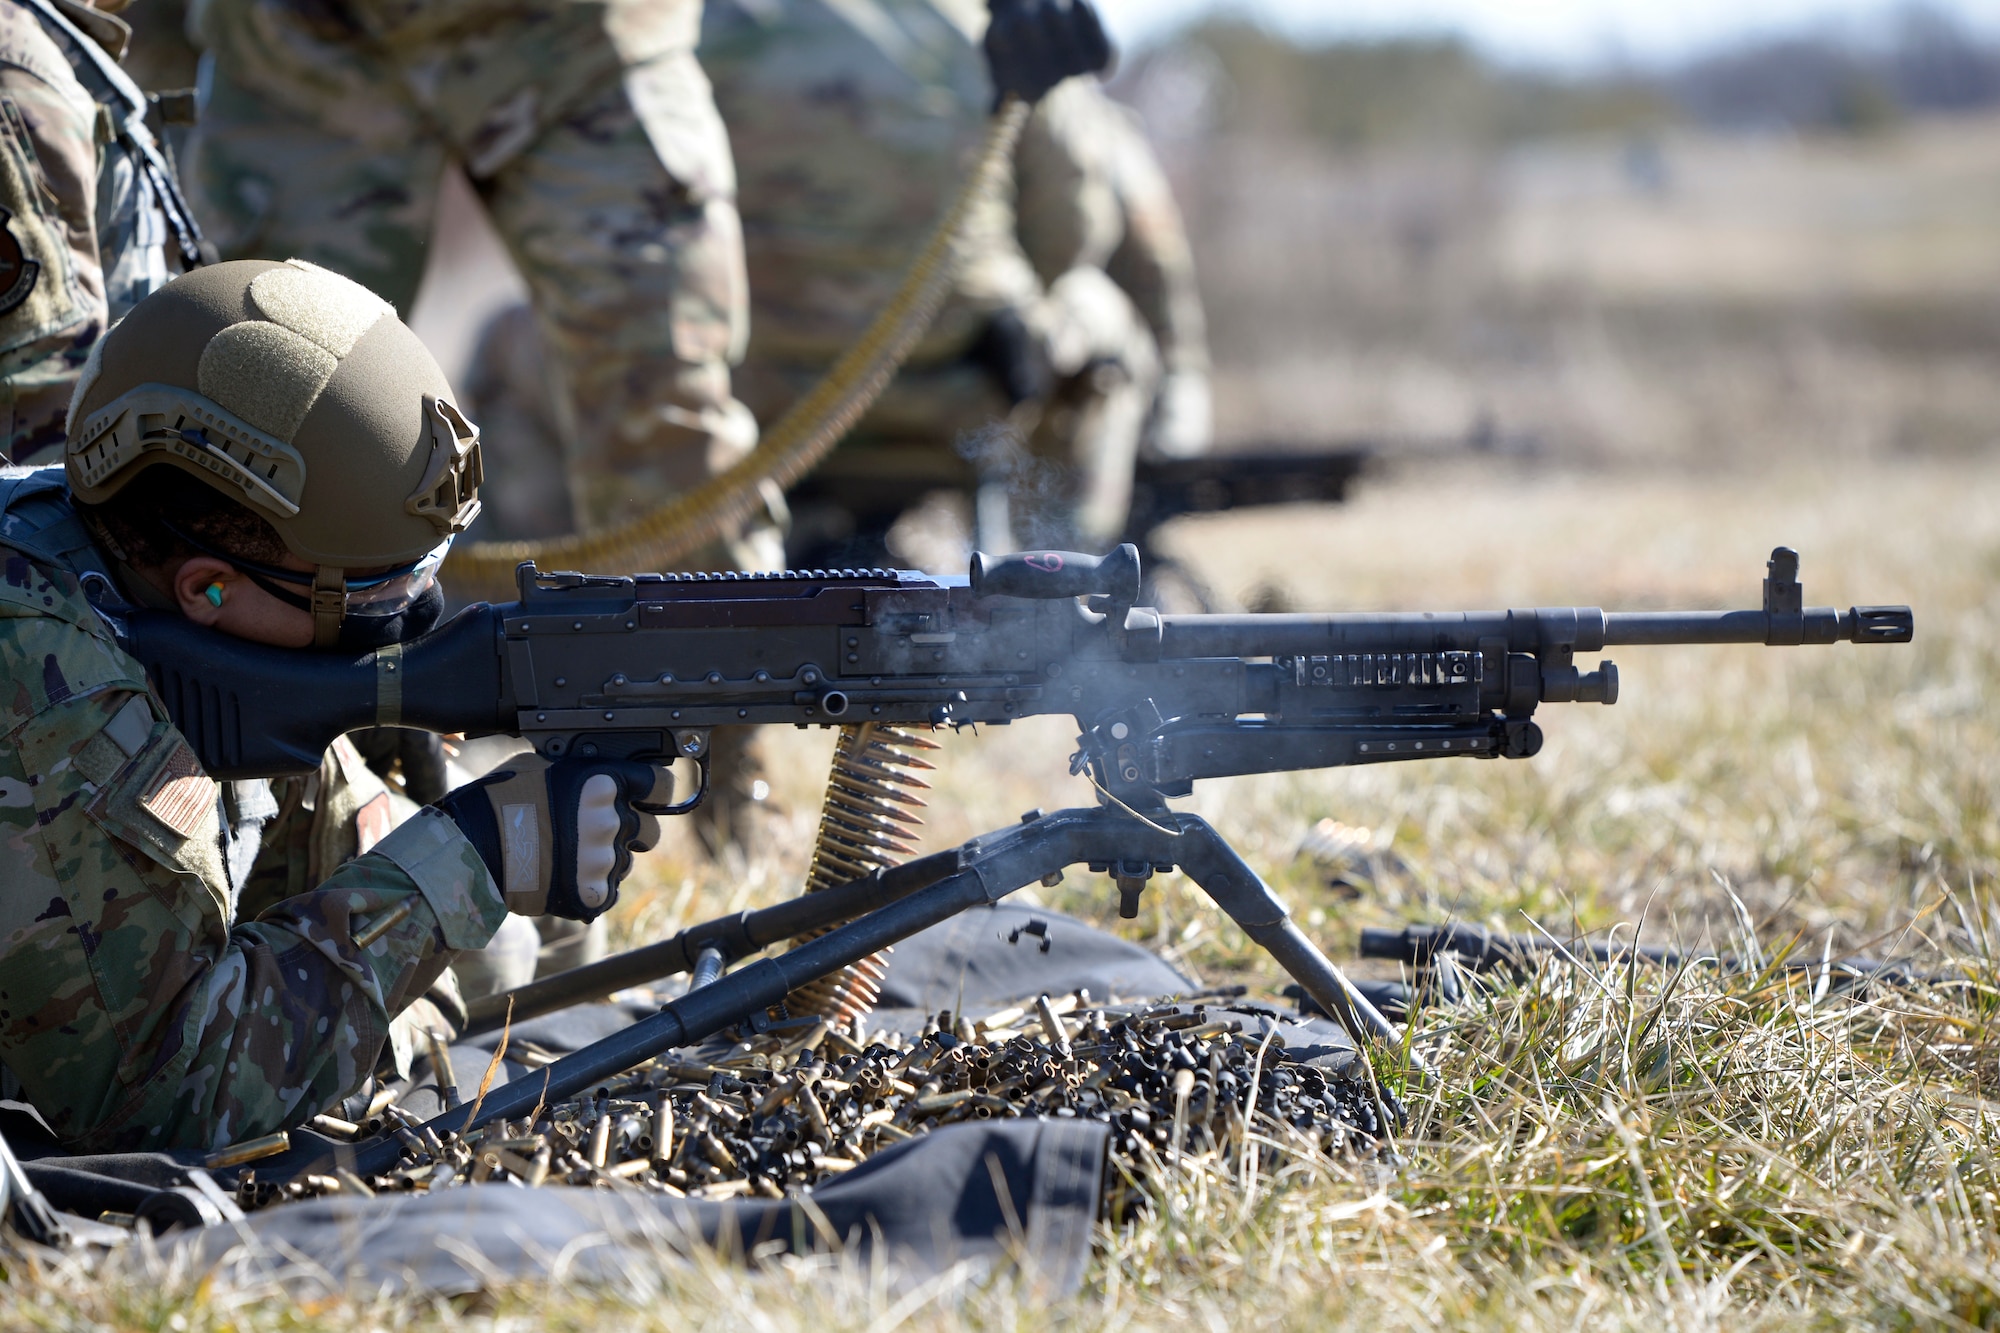 Airman 1st Class Aaron Edge, an 88th Security Forces Squadron defender, from Wright-Patterson Air Force Base, Ohio, fires an M240B machine gun at Camp Atterbury in Edinburgh, Indiana, on Feb. 25, 2021. Members of the 88th SFS, travel to Camp Atterbury multiple times each year for readiness and qualification training with deployers on machine guns and grenade launchers. (U.S. Air Force photo by Ty Greenlees)